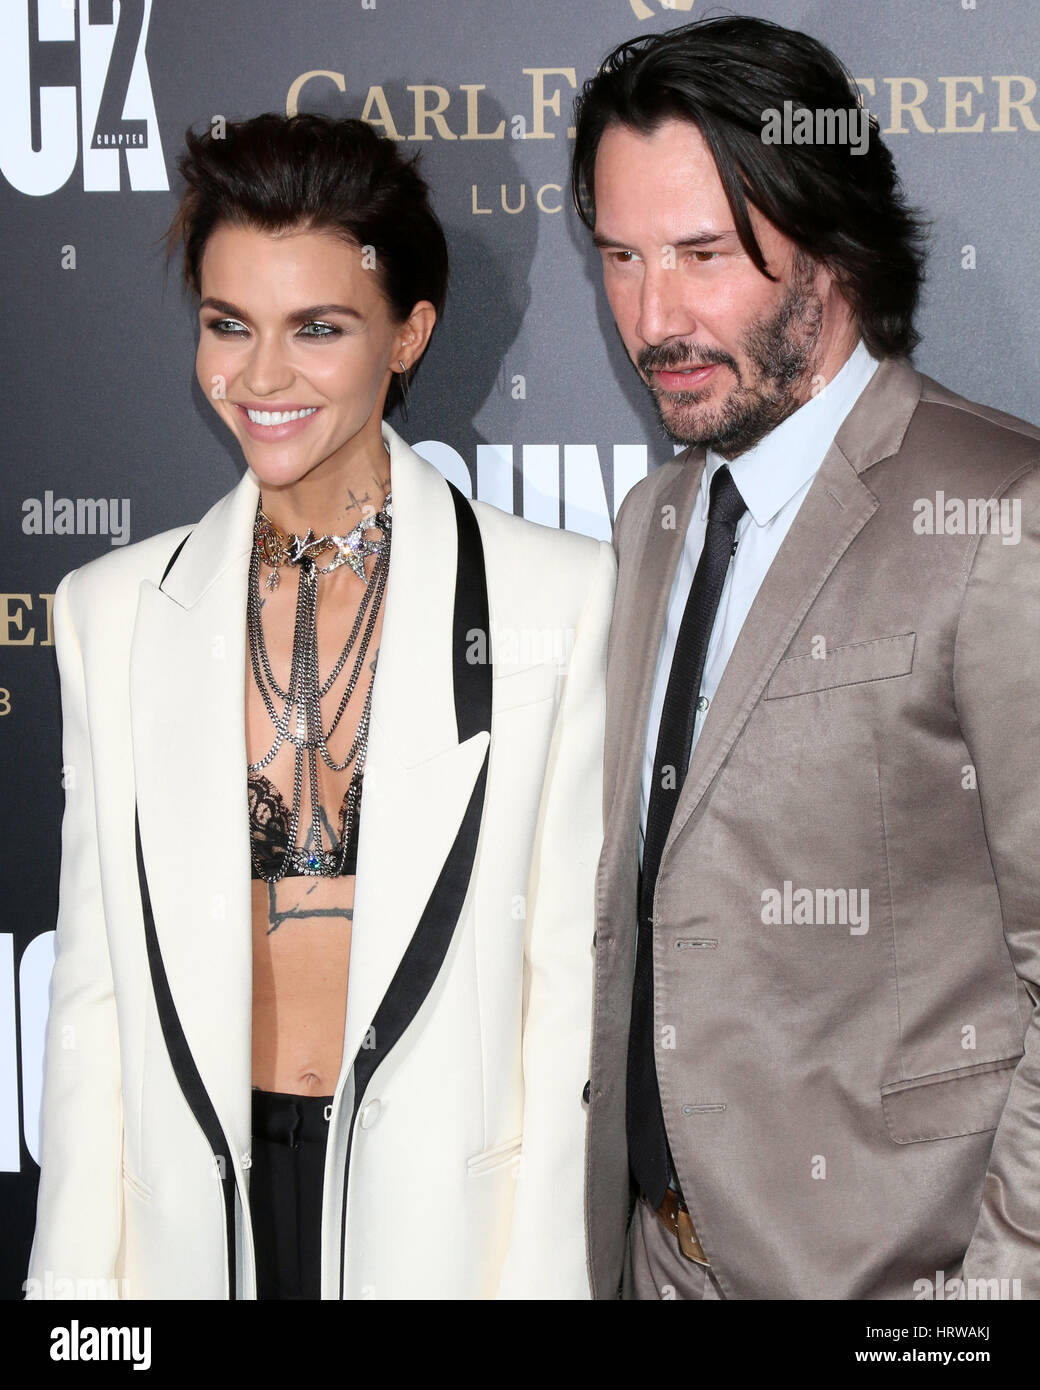 From the cast, actor Keanu Reeves and actress Ruby Rose pose on arrival for  the premiere of the film John Wick Chapter Two in Hollywood, C…